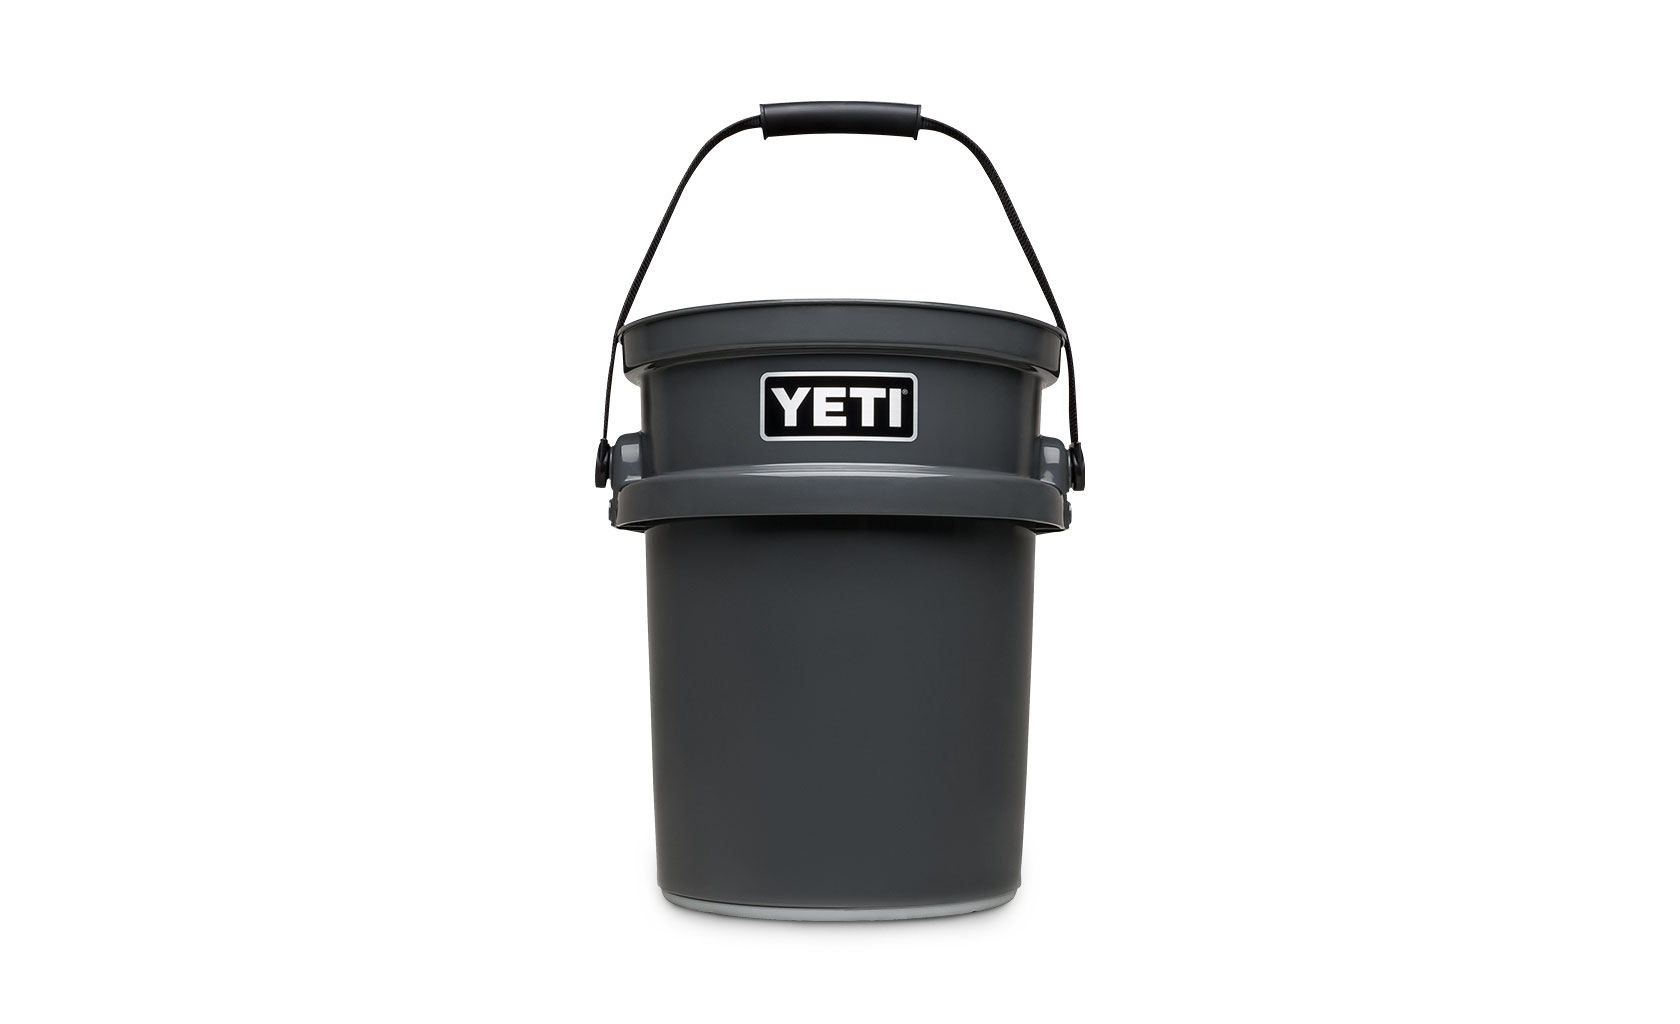 REVIEW: The YETI Loadout Bucket